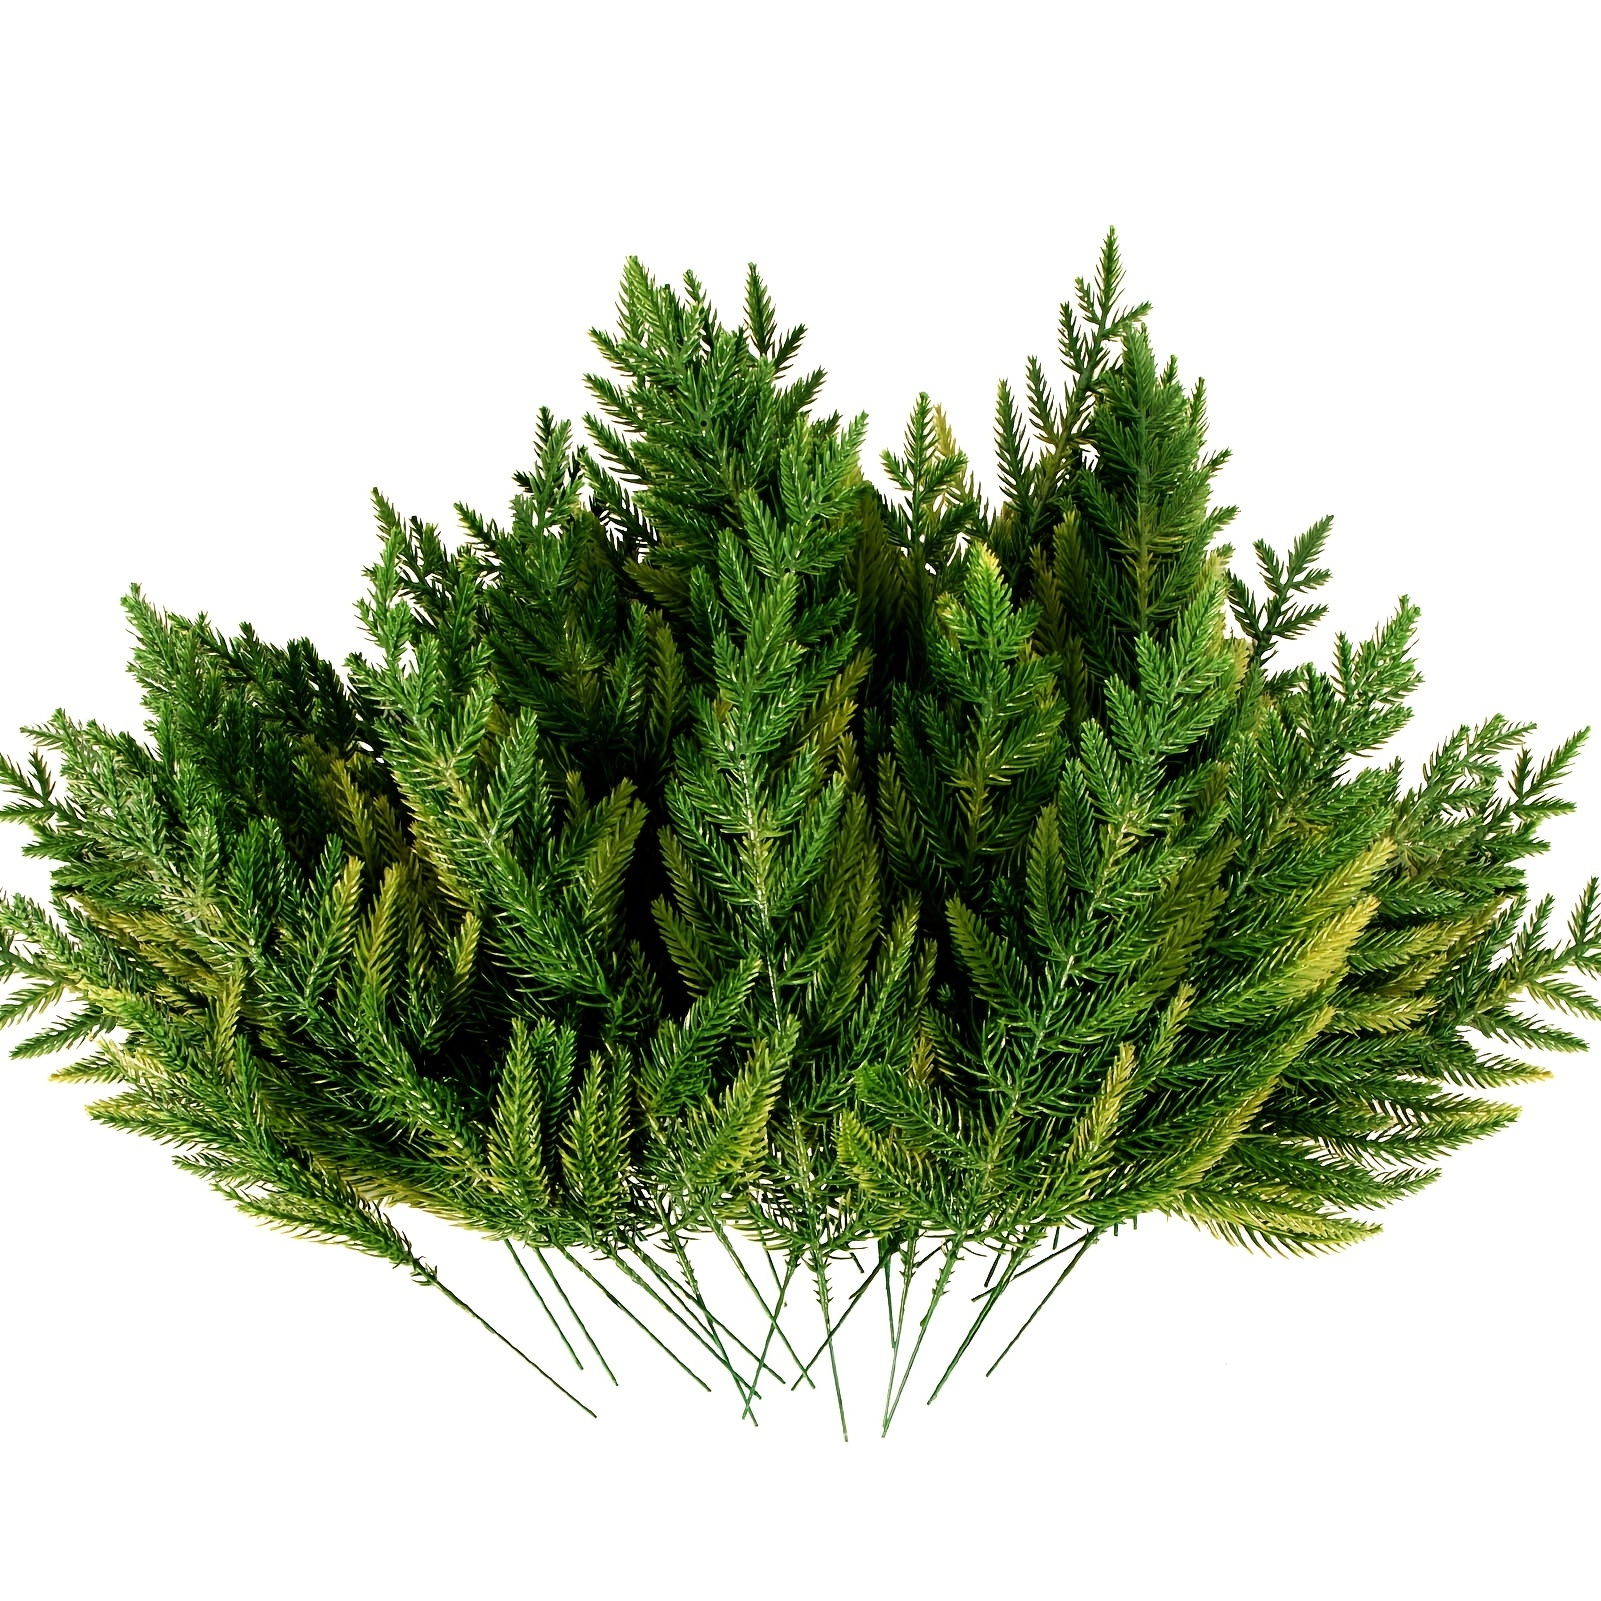 

10pcs, Christmas Artificial Pine Tree Branch (9.8"x3.5"), Diy Wreath, Scene Decor, Holiday Accessory, Birthday Party Supplies